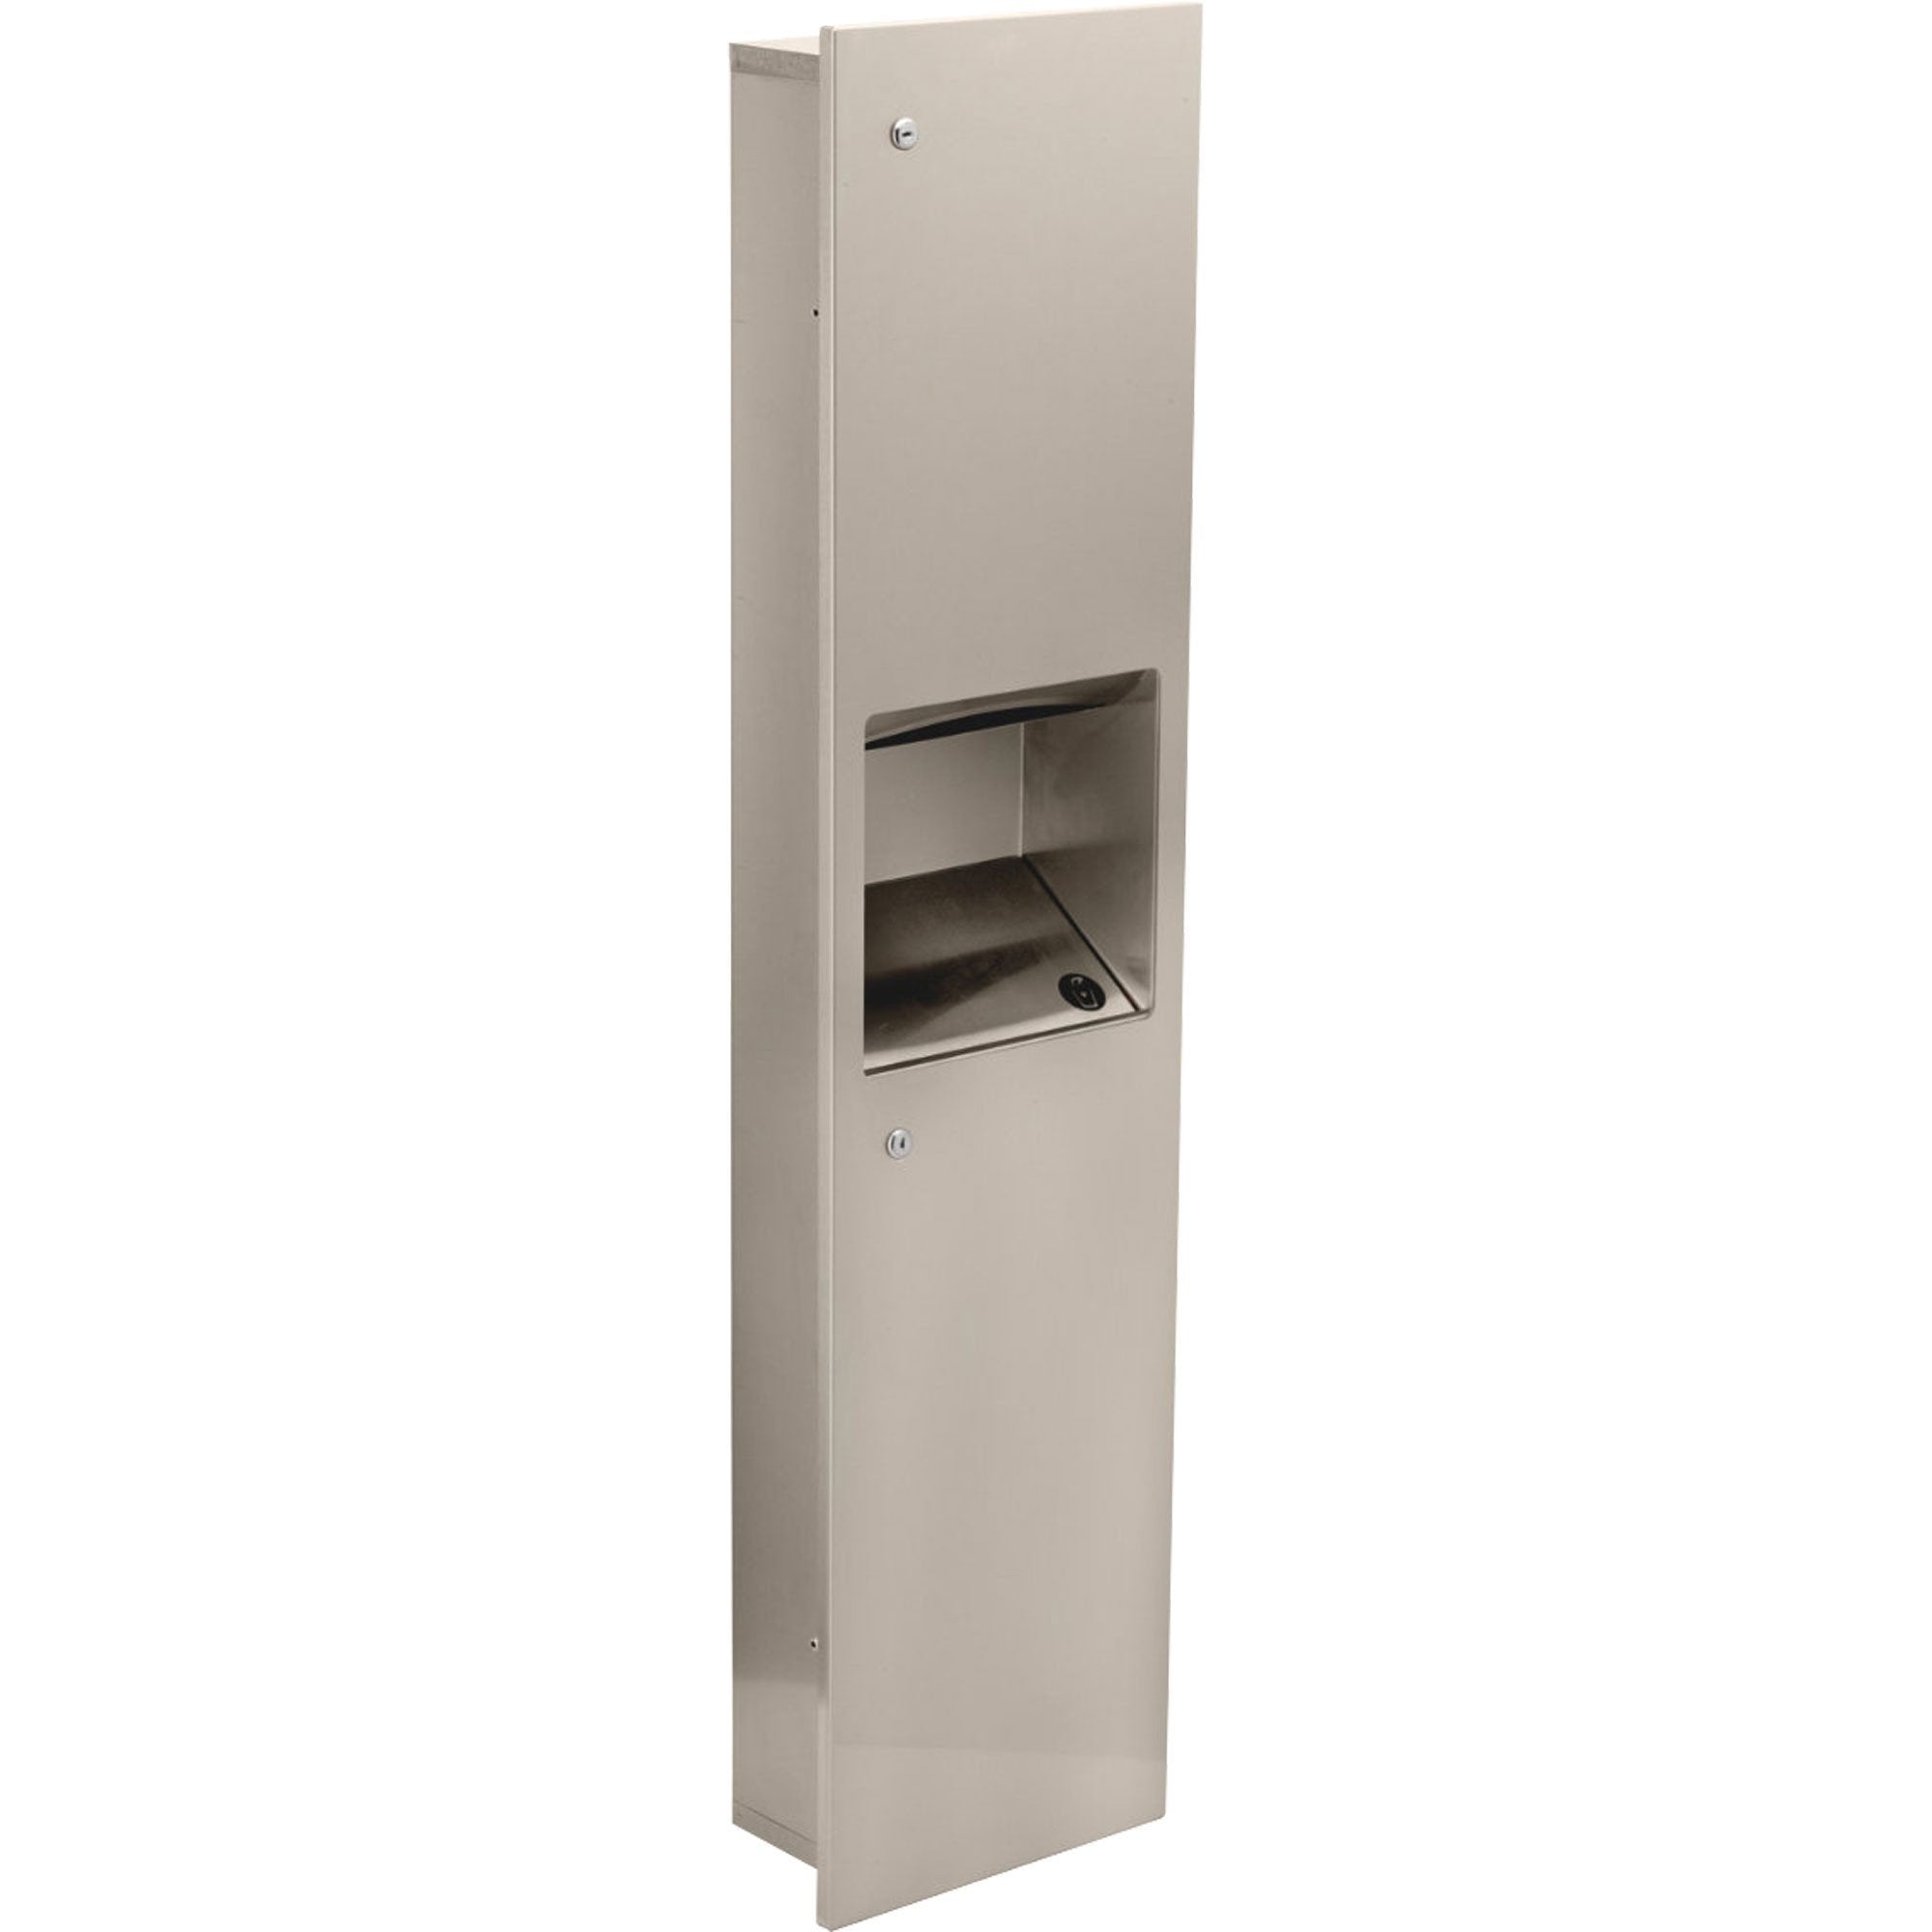 Delta Large Recessed Stainless Steel Towel Dispenser & Waste Receptacle 572967